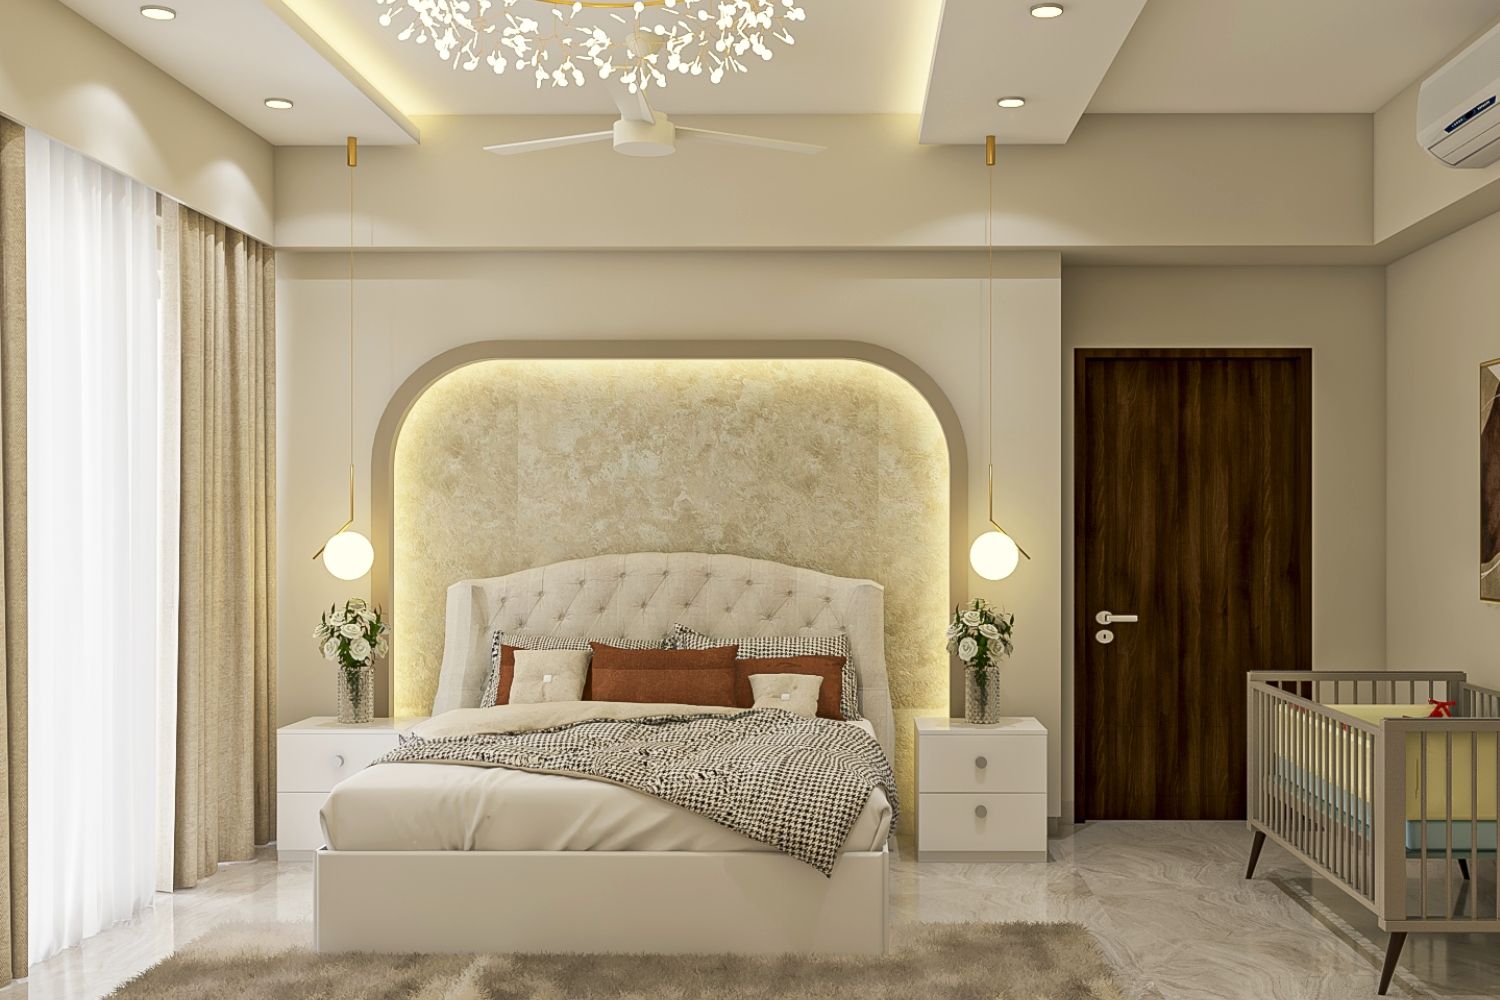 Contemporary Beige Master Bedroom Design With Arched LED Wall Niche And Patterned Wallpaper